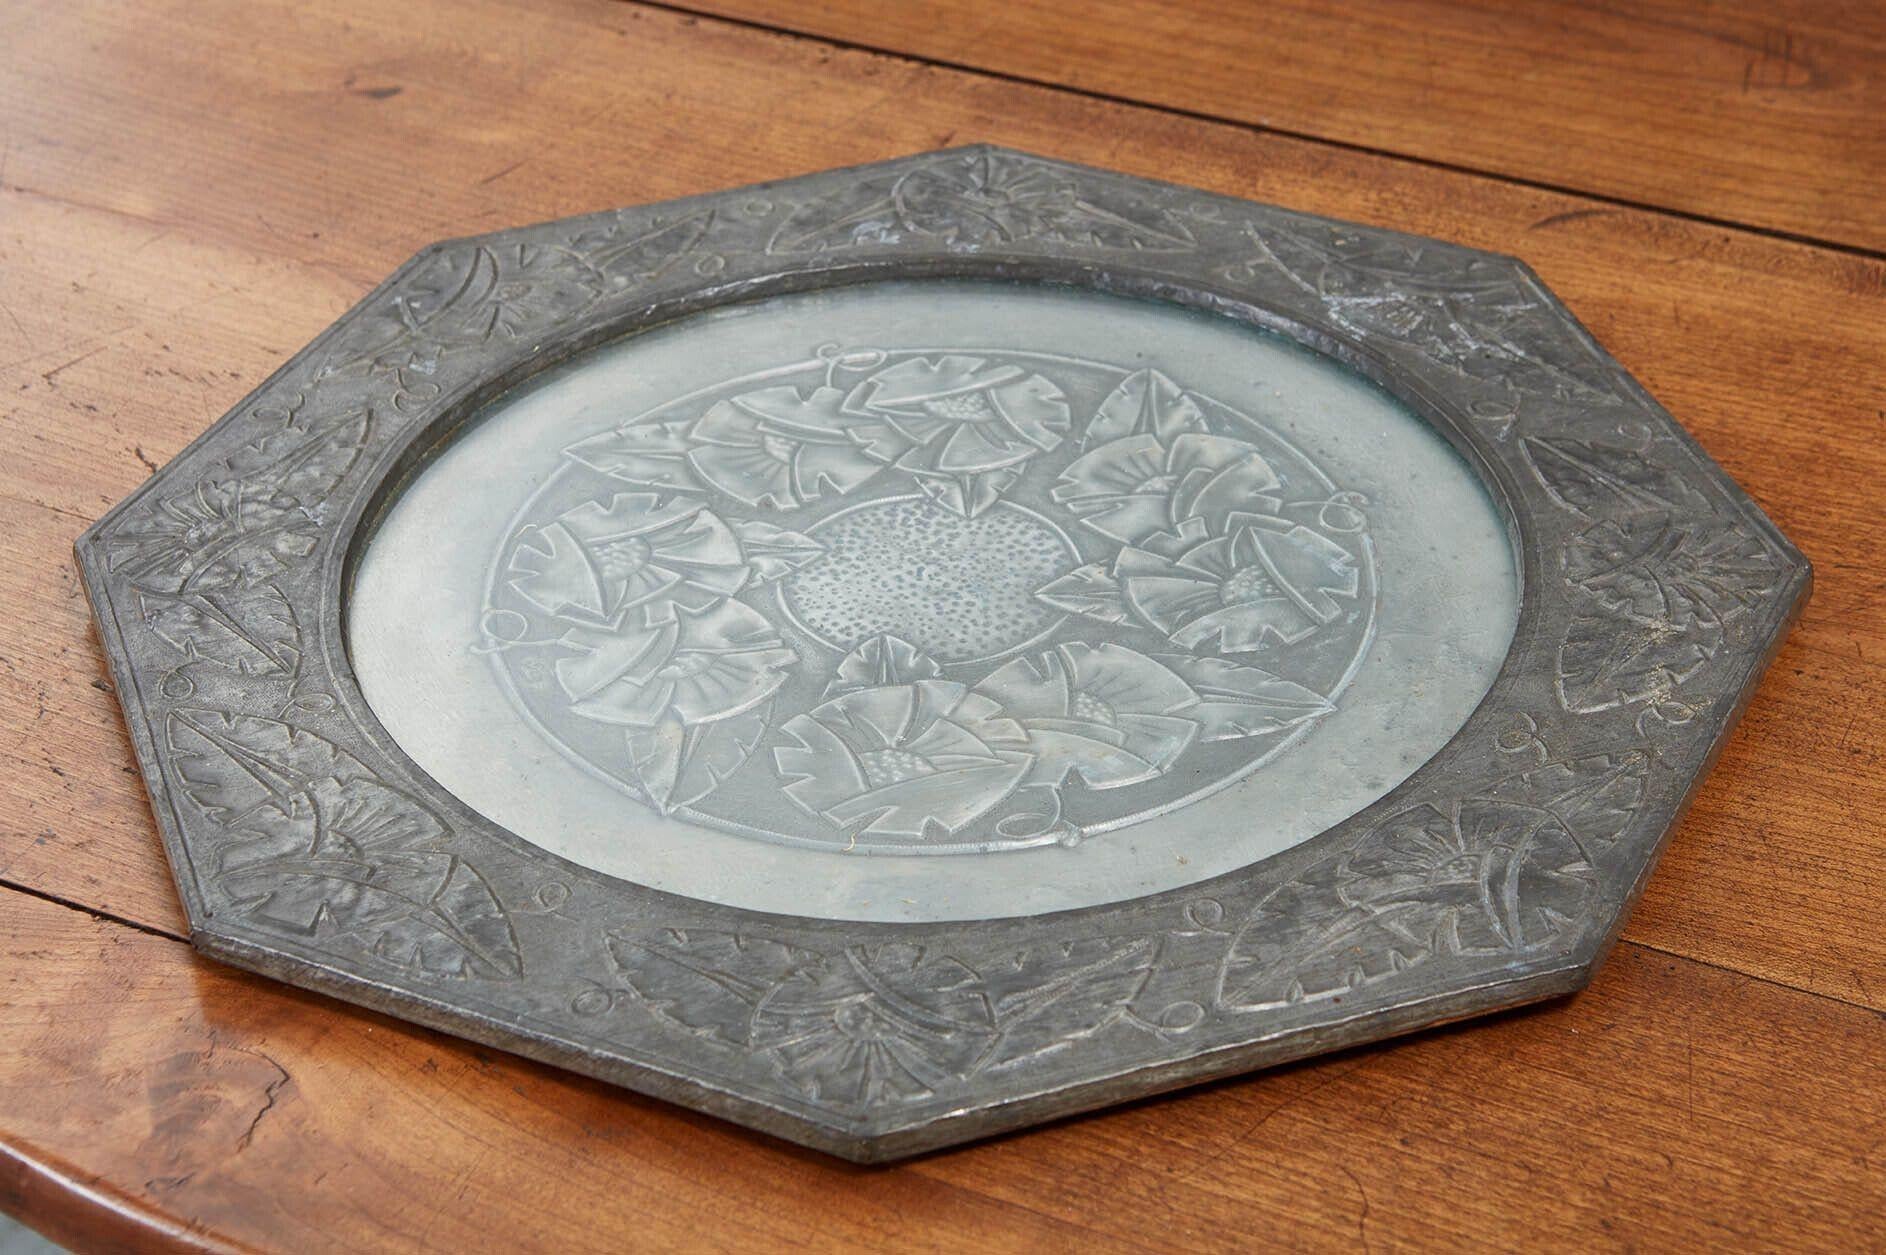 An Arts & Crafts octagonal wall tray in two toned pewter with circular glass center decorated around rim and under glass with vine and leaf motif. Original glass and backboard. English, circa 1900.